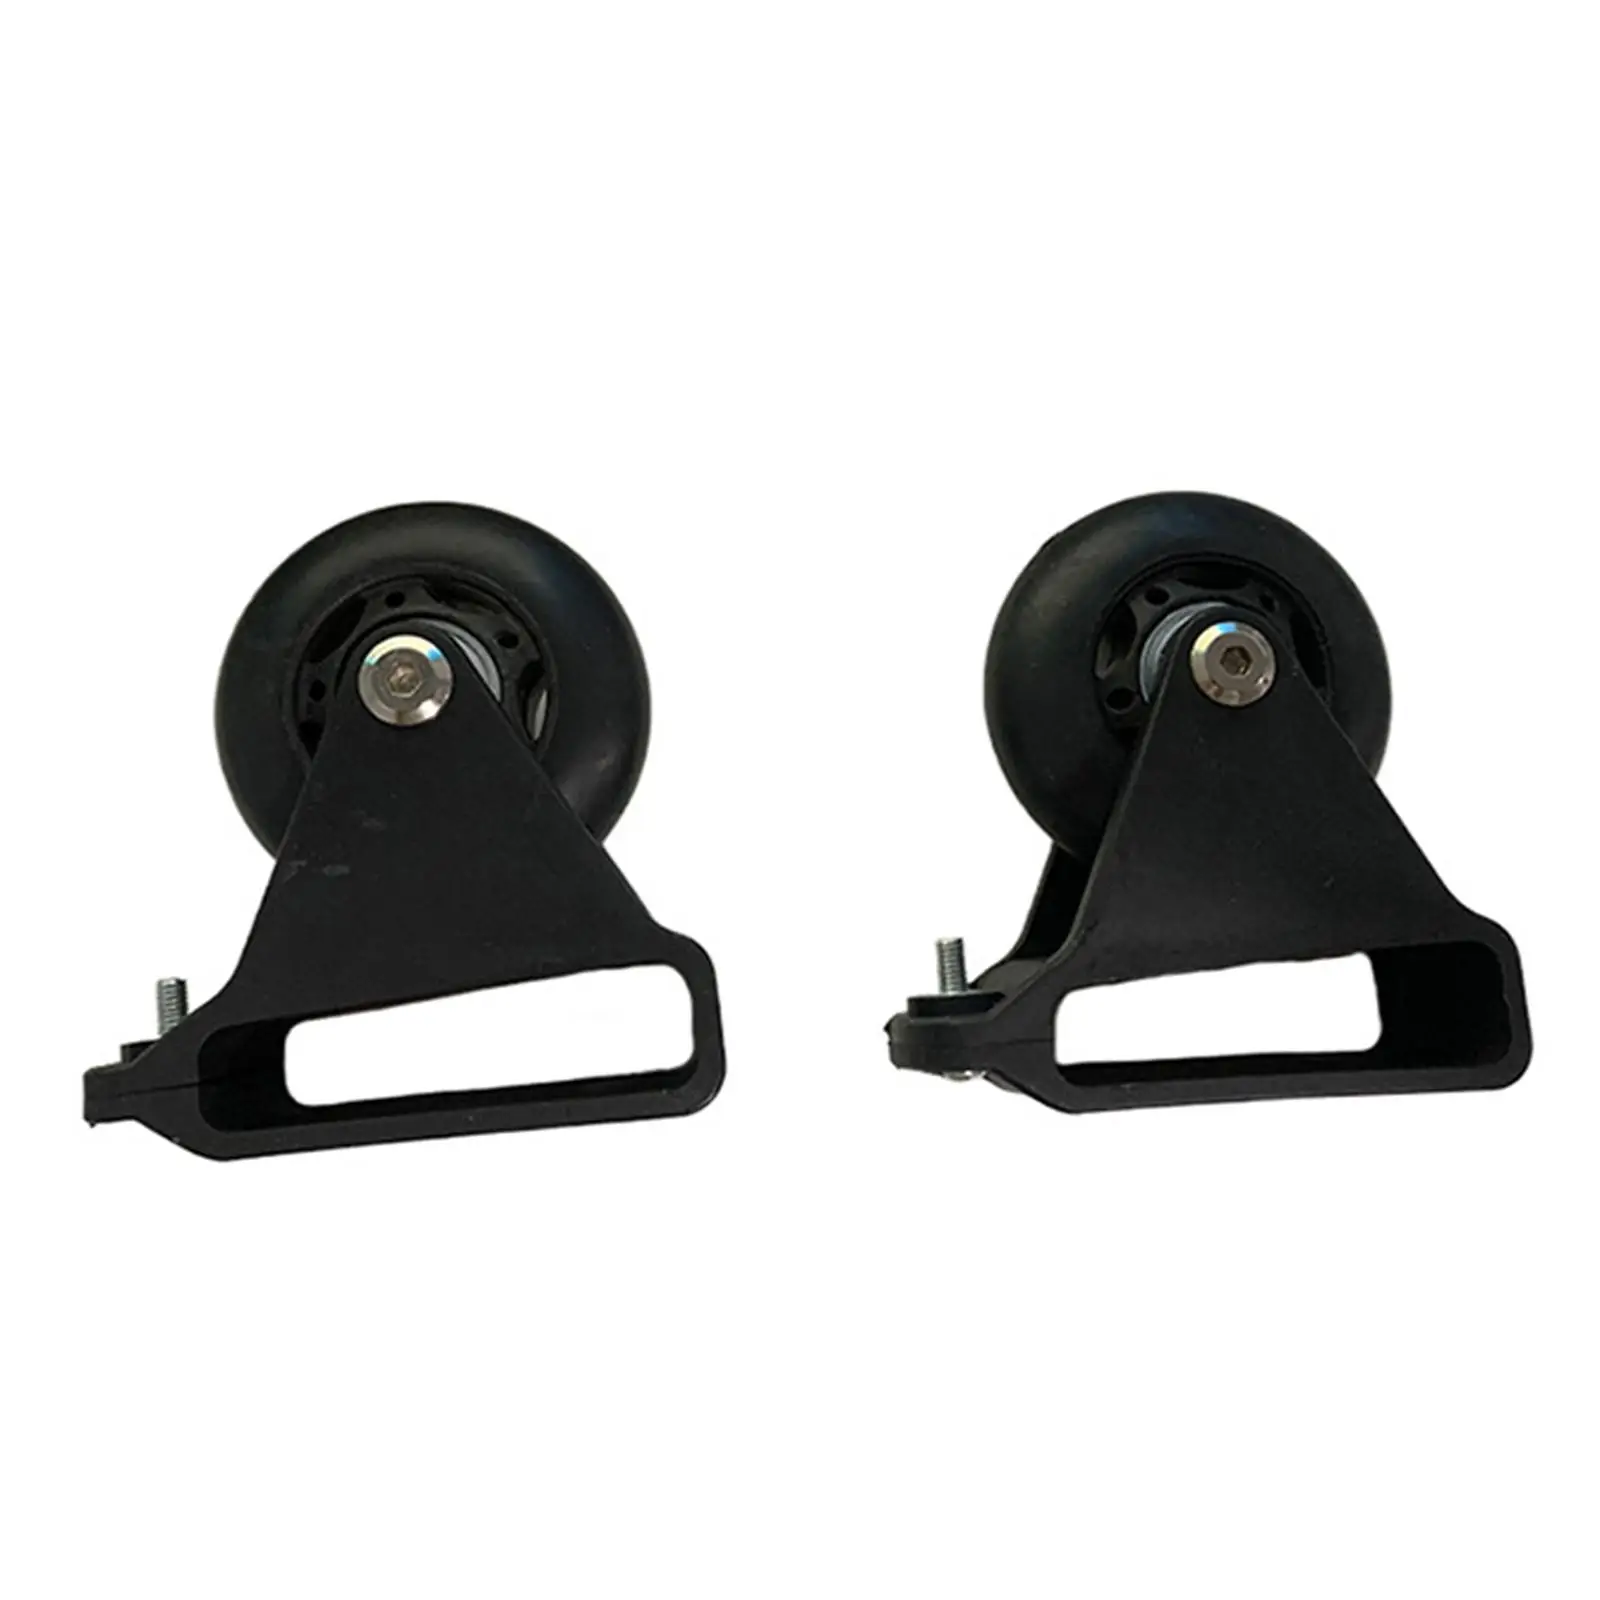 2x Ladder Leveling Casters Cart Accessories for Equipment Shelves Machine